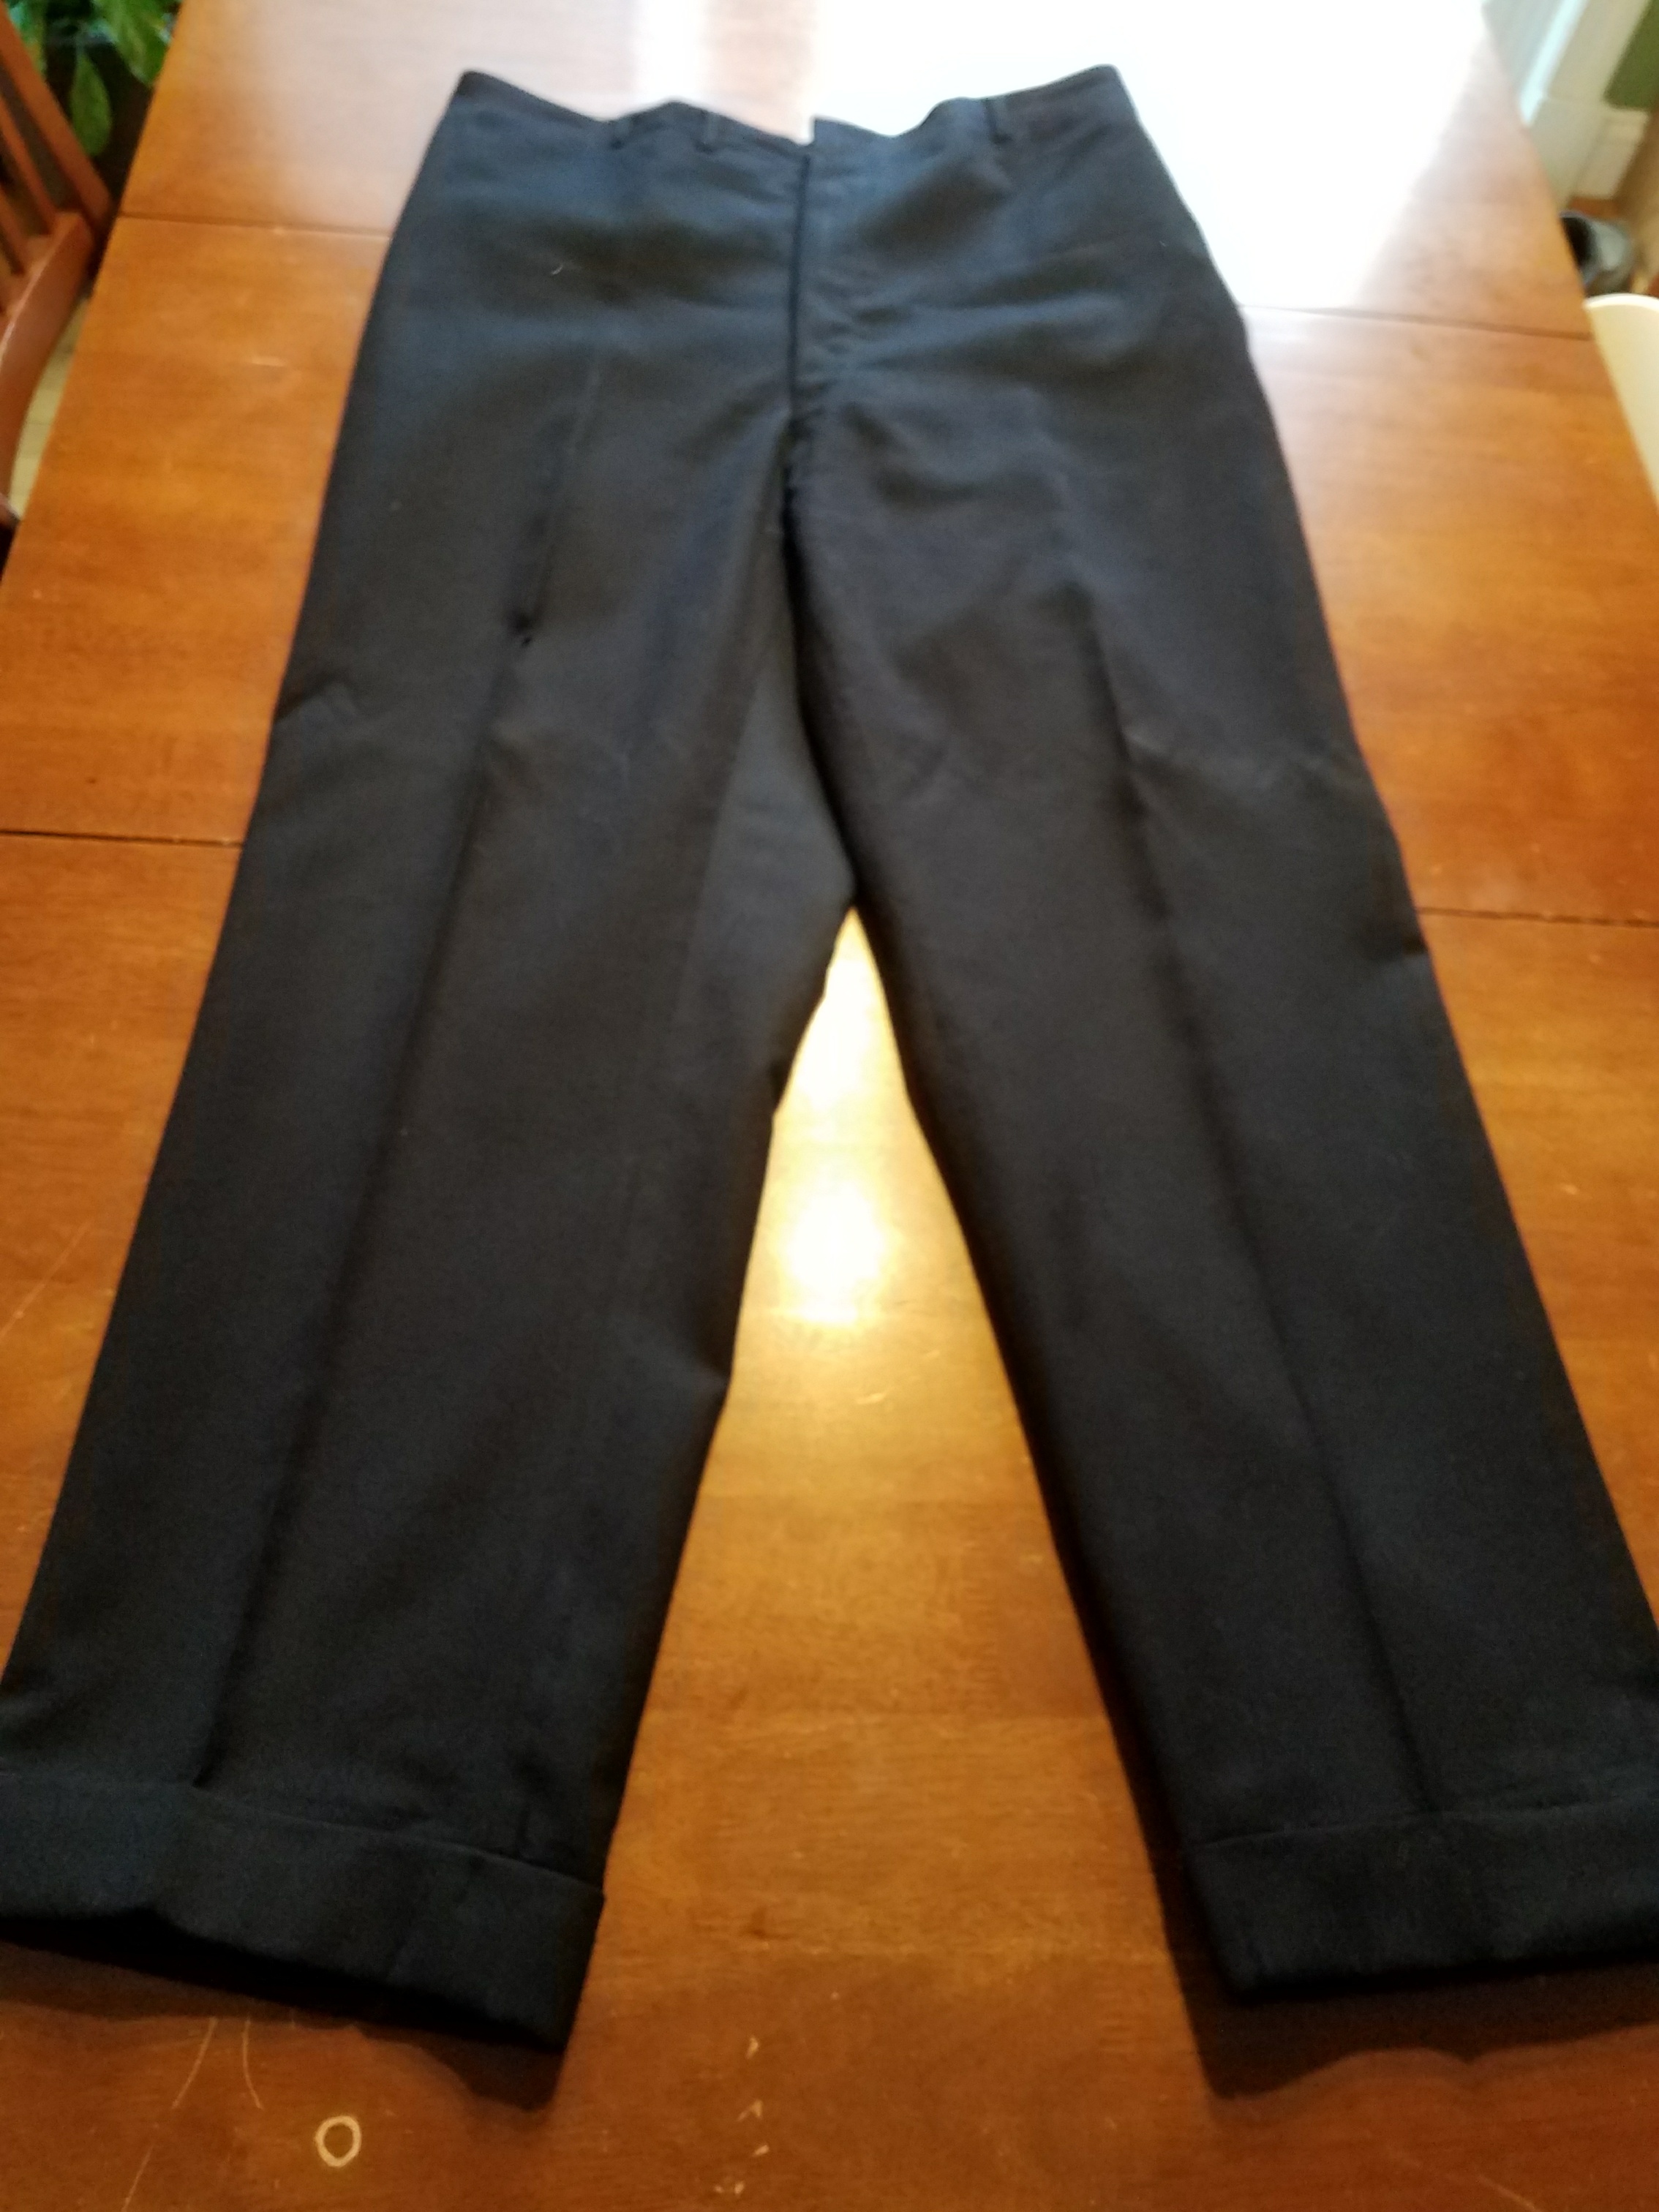 40's drop loop pants up for grabs | The Fedora Lounge